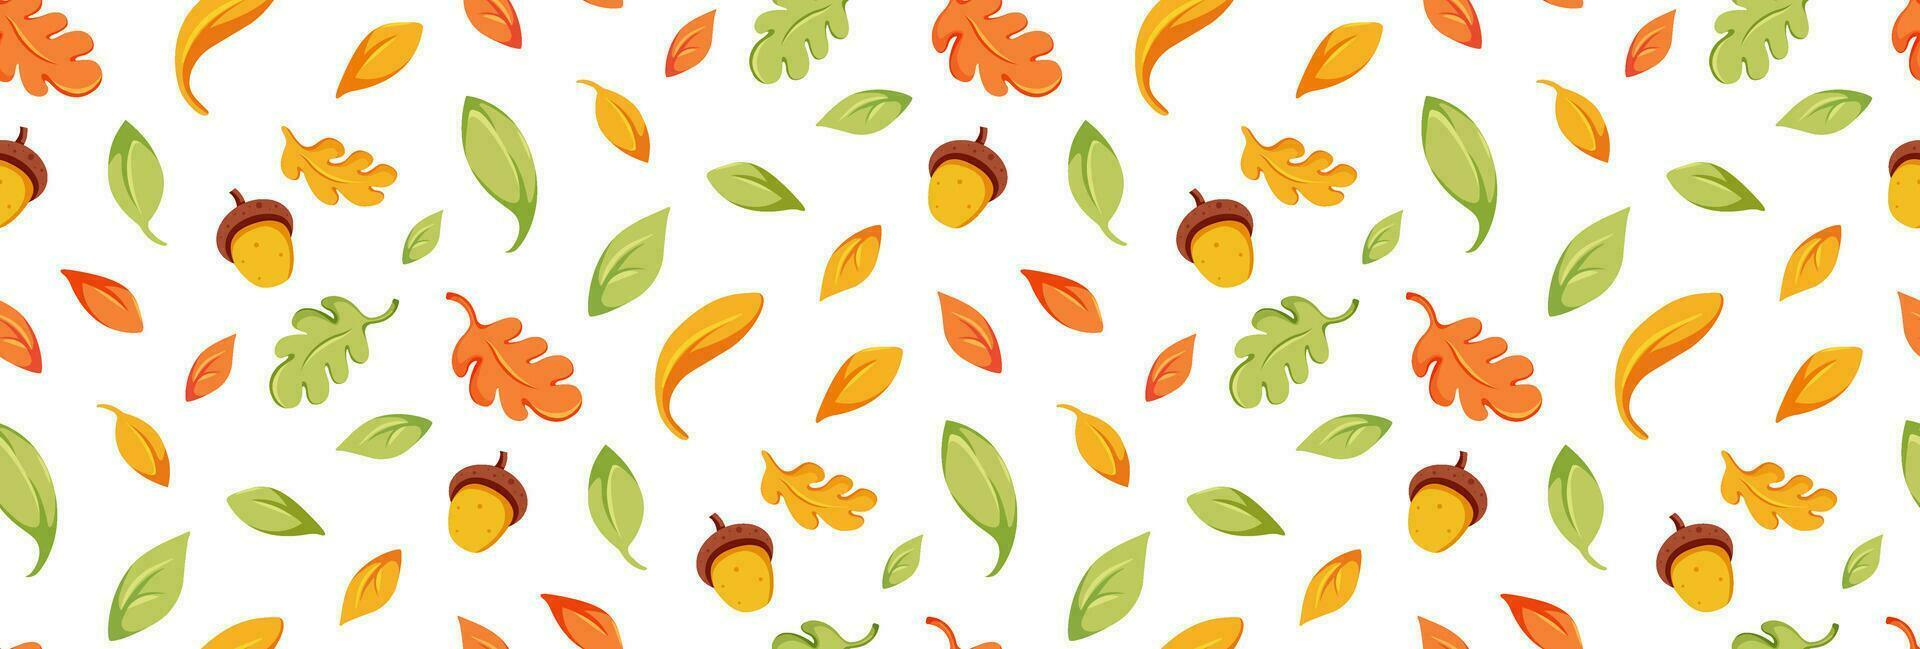 Autumn seamless Pattern. Autumn falling leaves and acorns. Vector flat illustration. Pattern for background, printing on wrapping paper, wallpaper or fabric.